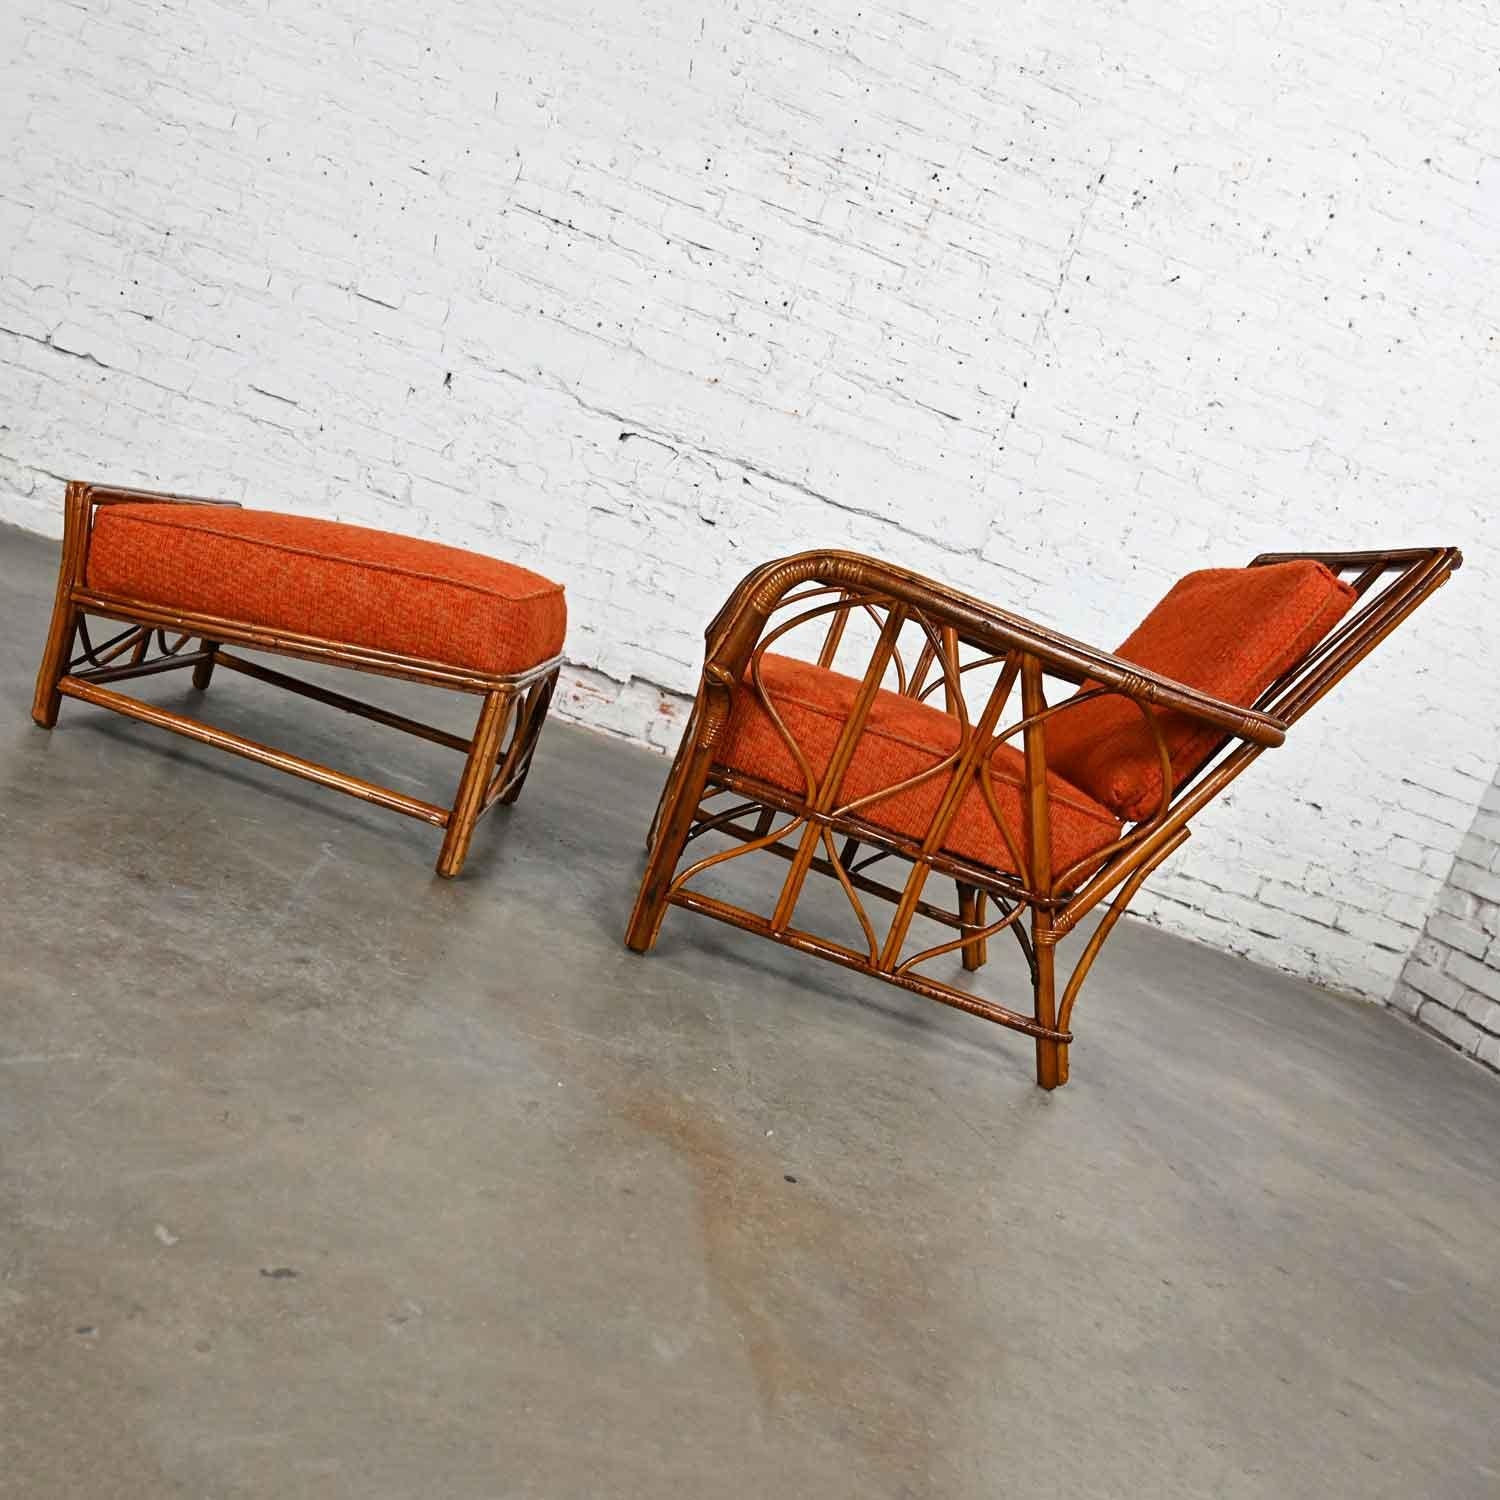 Rattan Lounge Chair & Ottoman Orange Fabric Cushions by Helmers Manufacturing Co 1